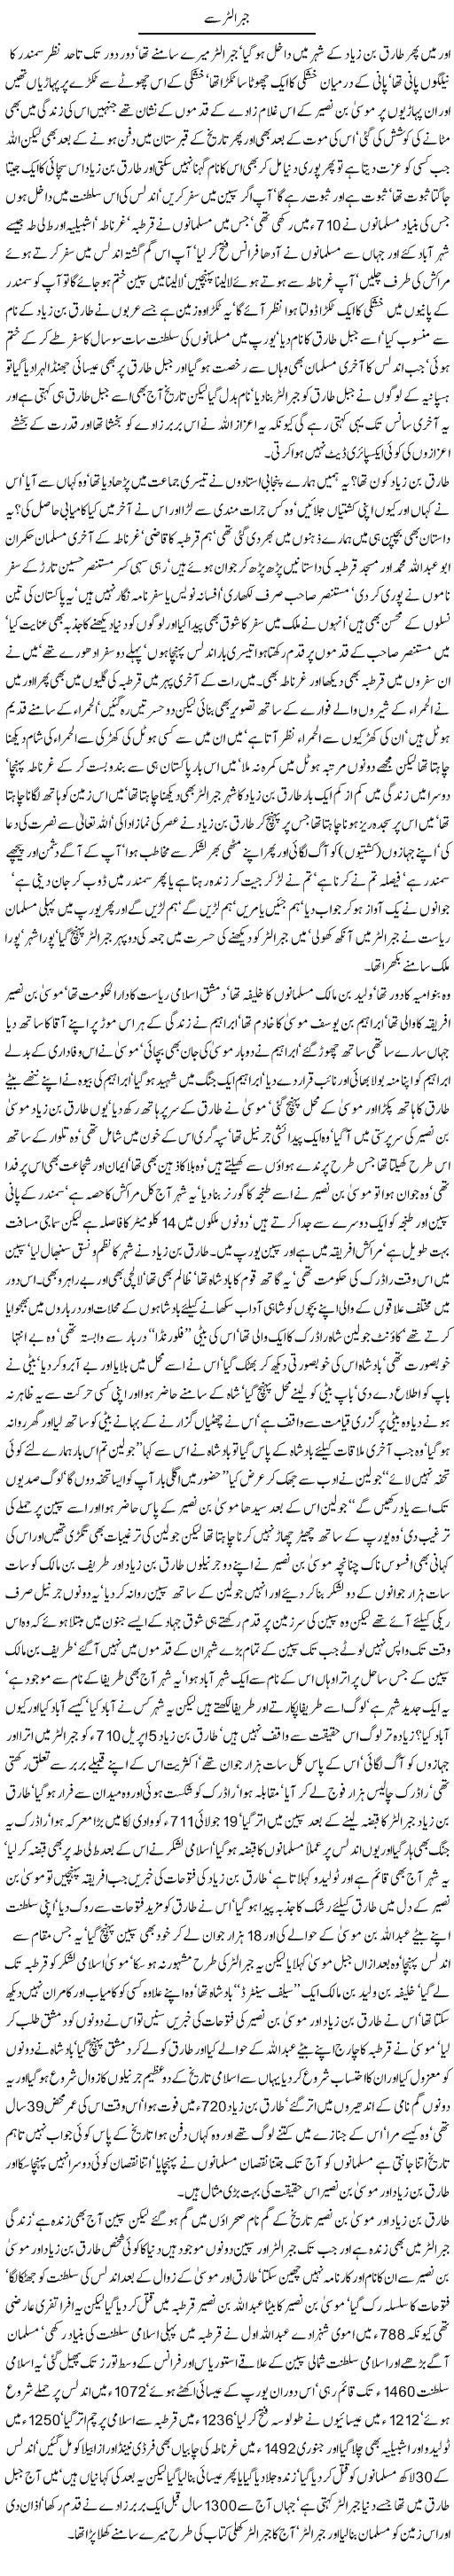 Jaber alter say By Javed Chaudhry